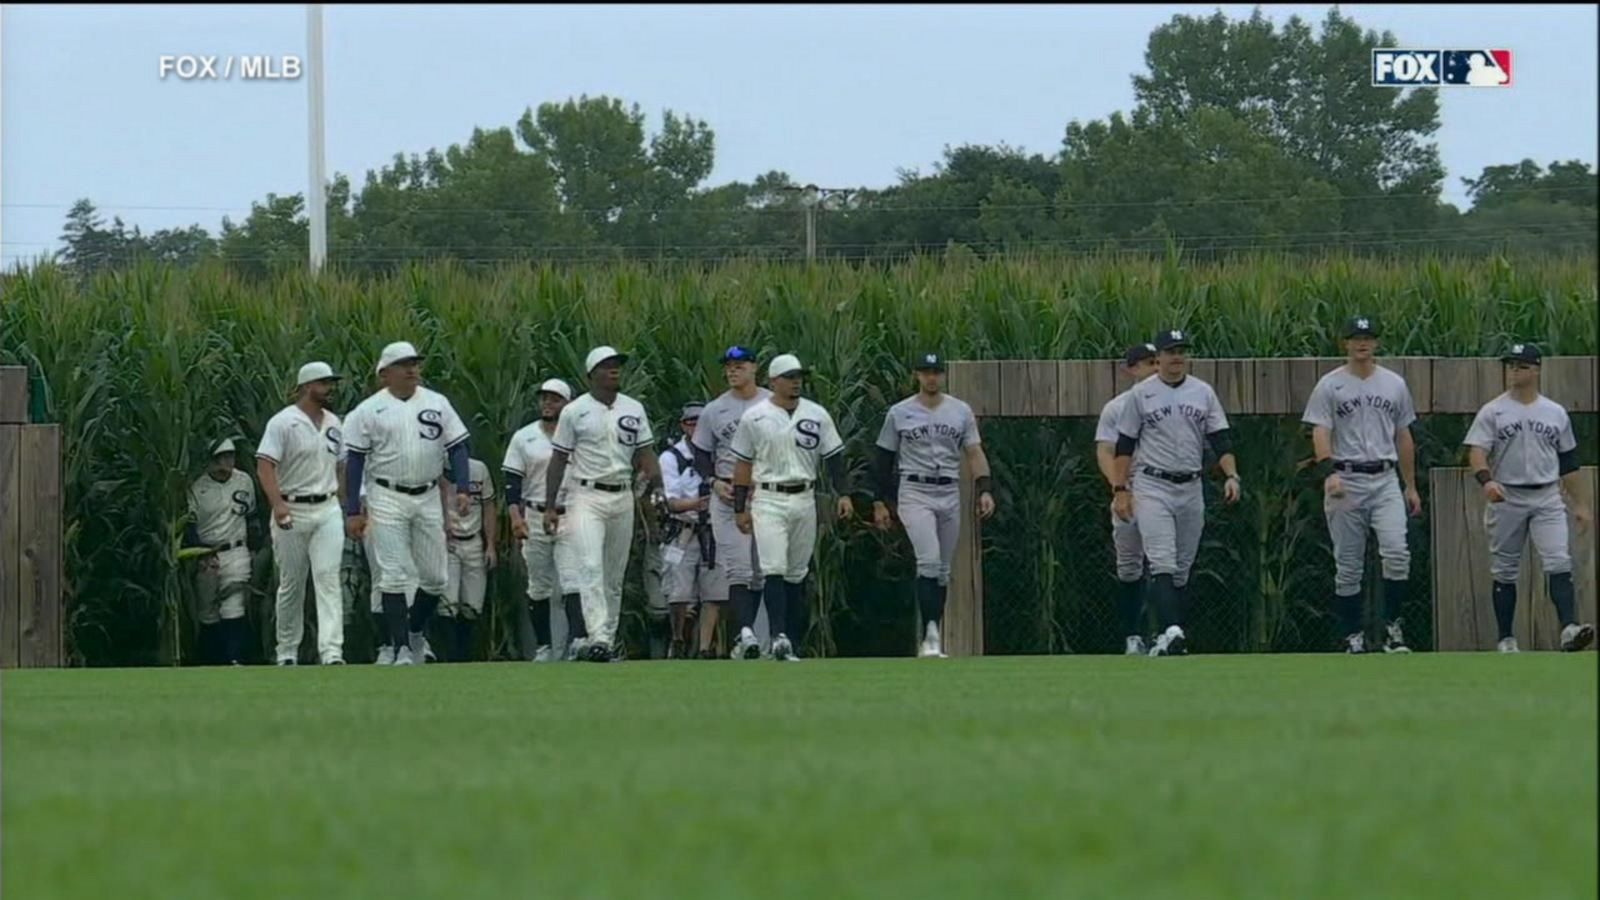 See Yankees, White Sox throwback uniforms for Field of Dreams game